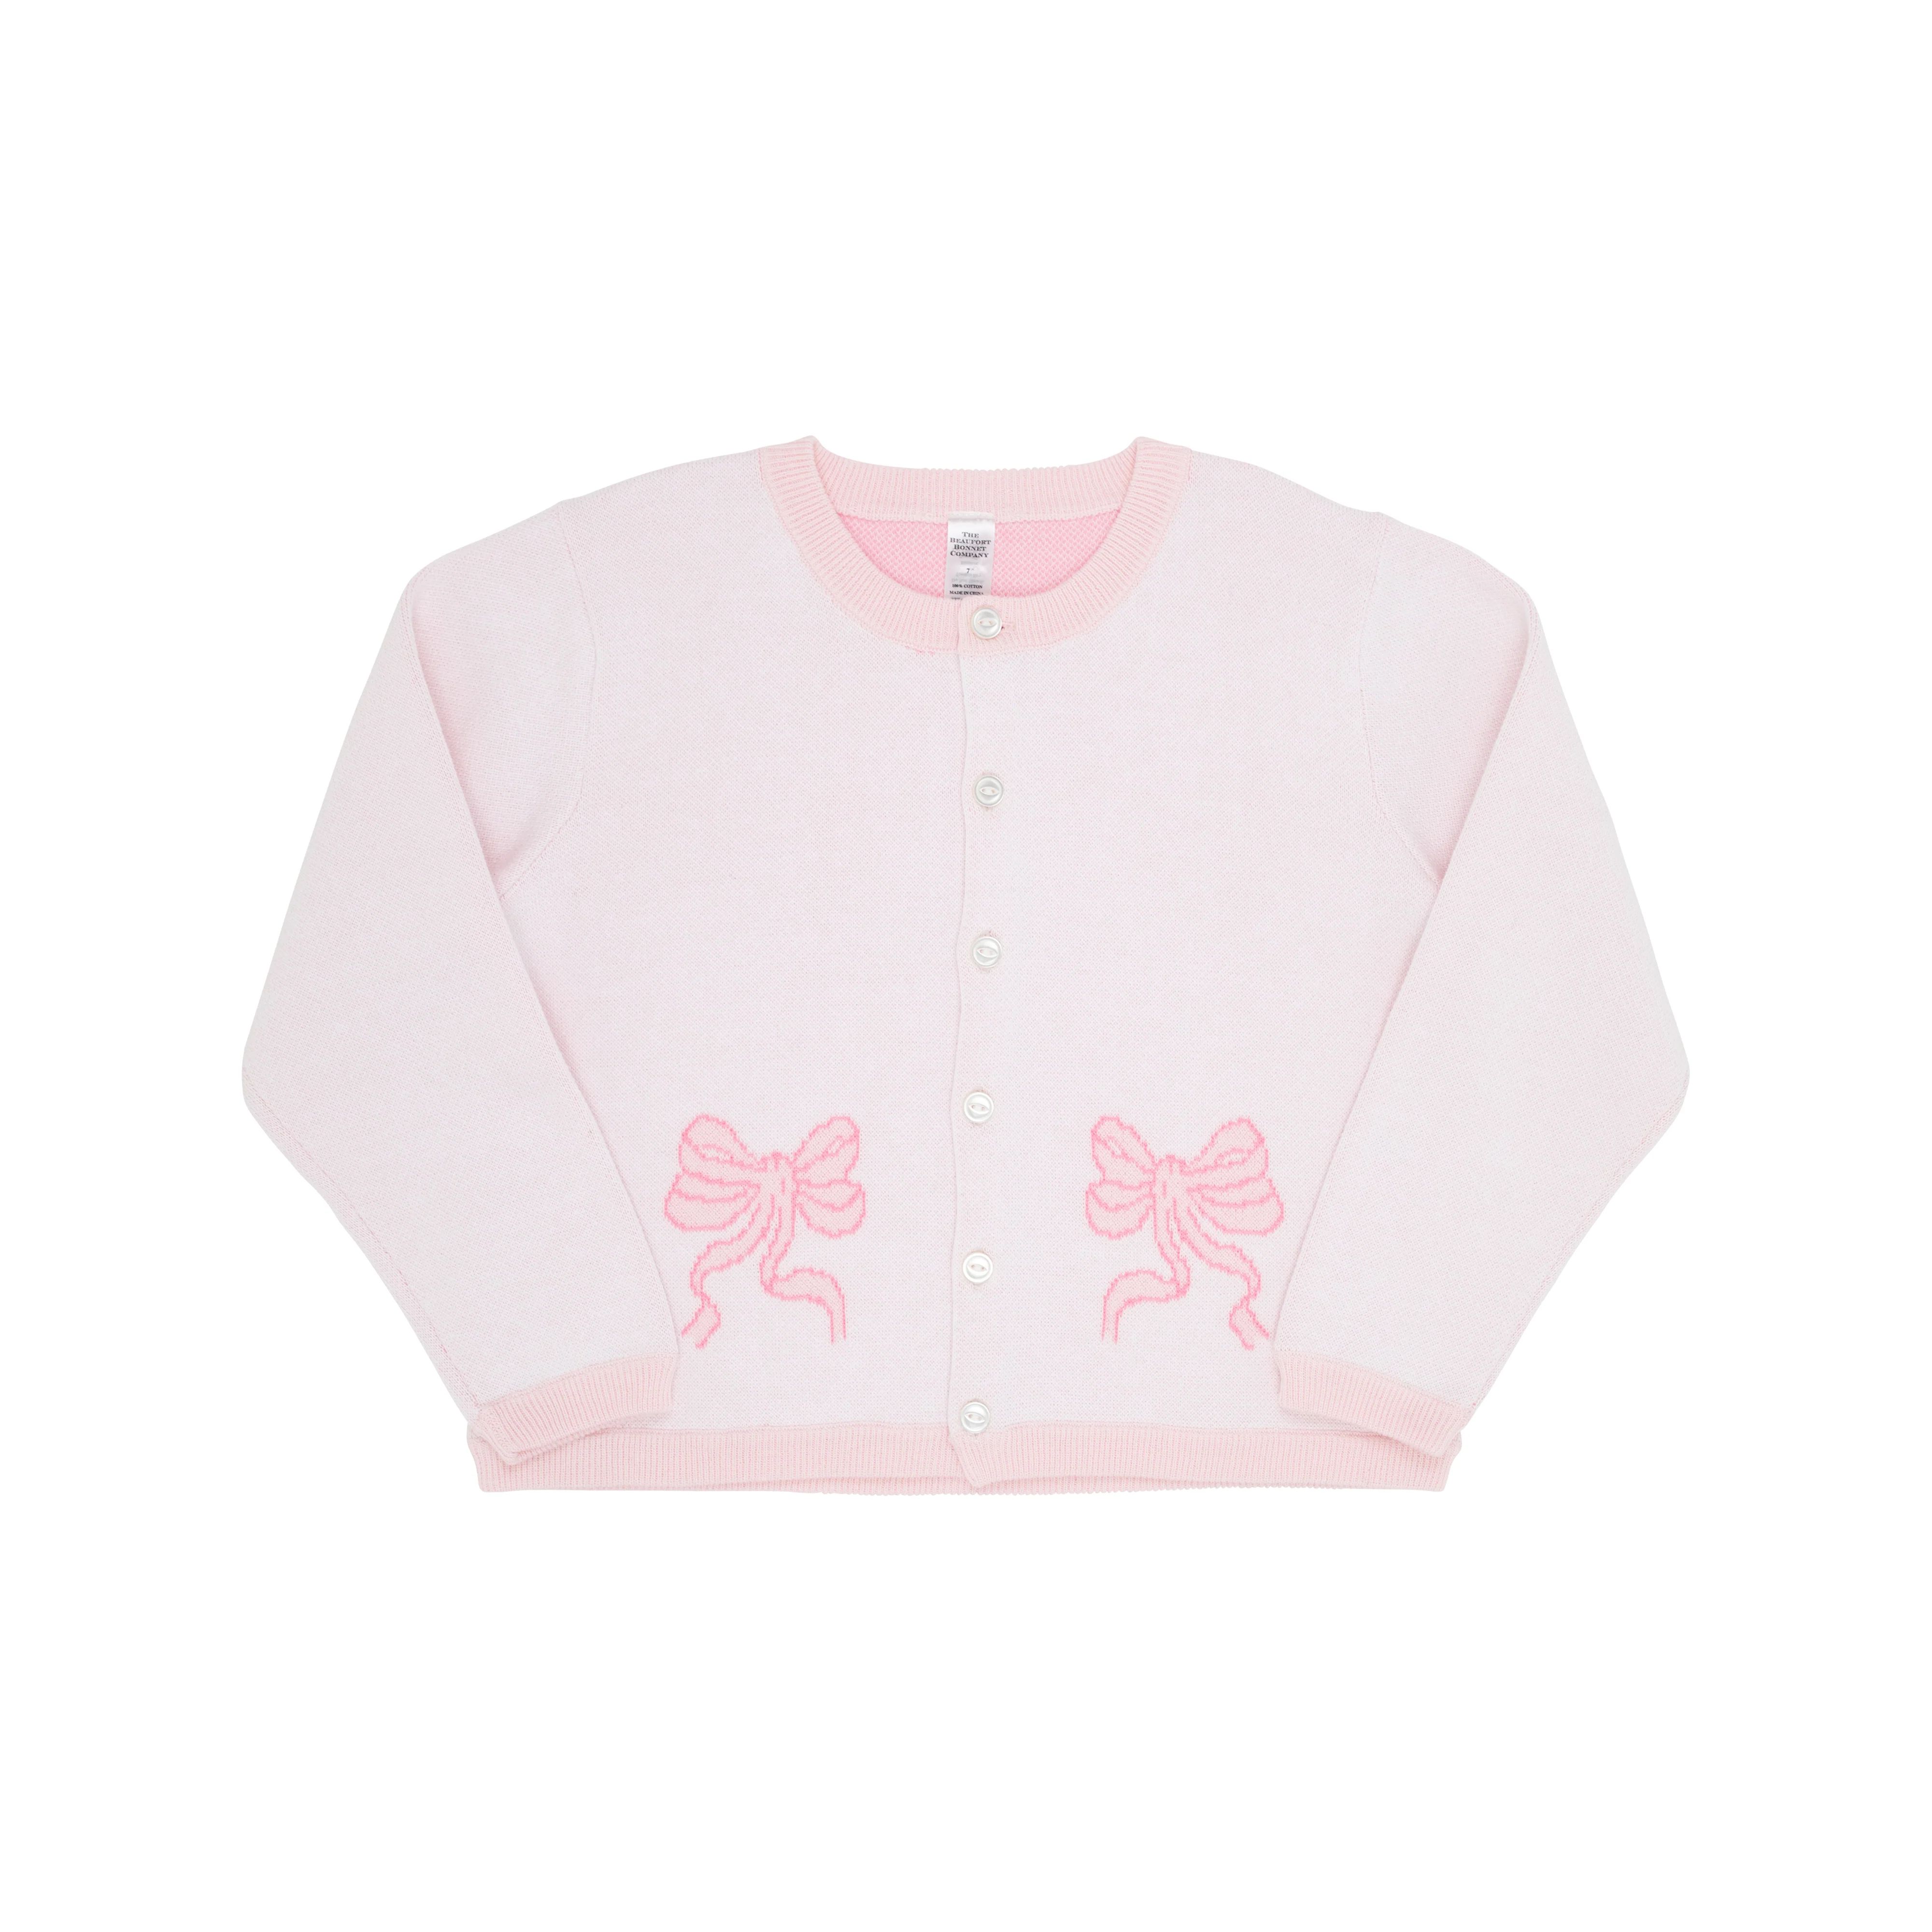 Cambridge Cardigan - Palm Beach Pink with Hamptons Hot Pink Bow Intarsia | The Beaufort Bonnet Company